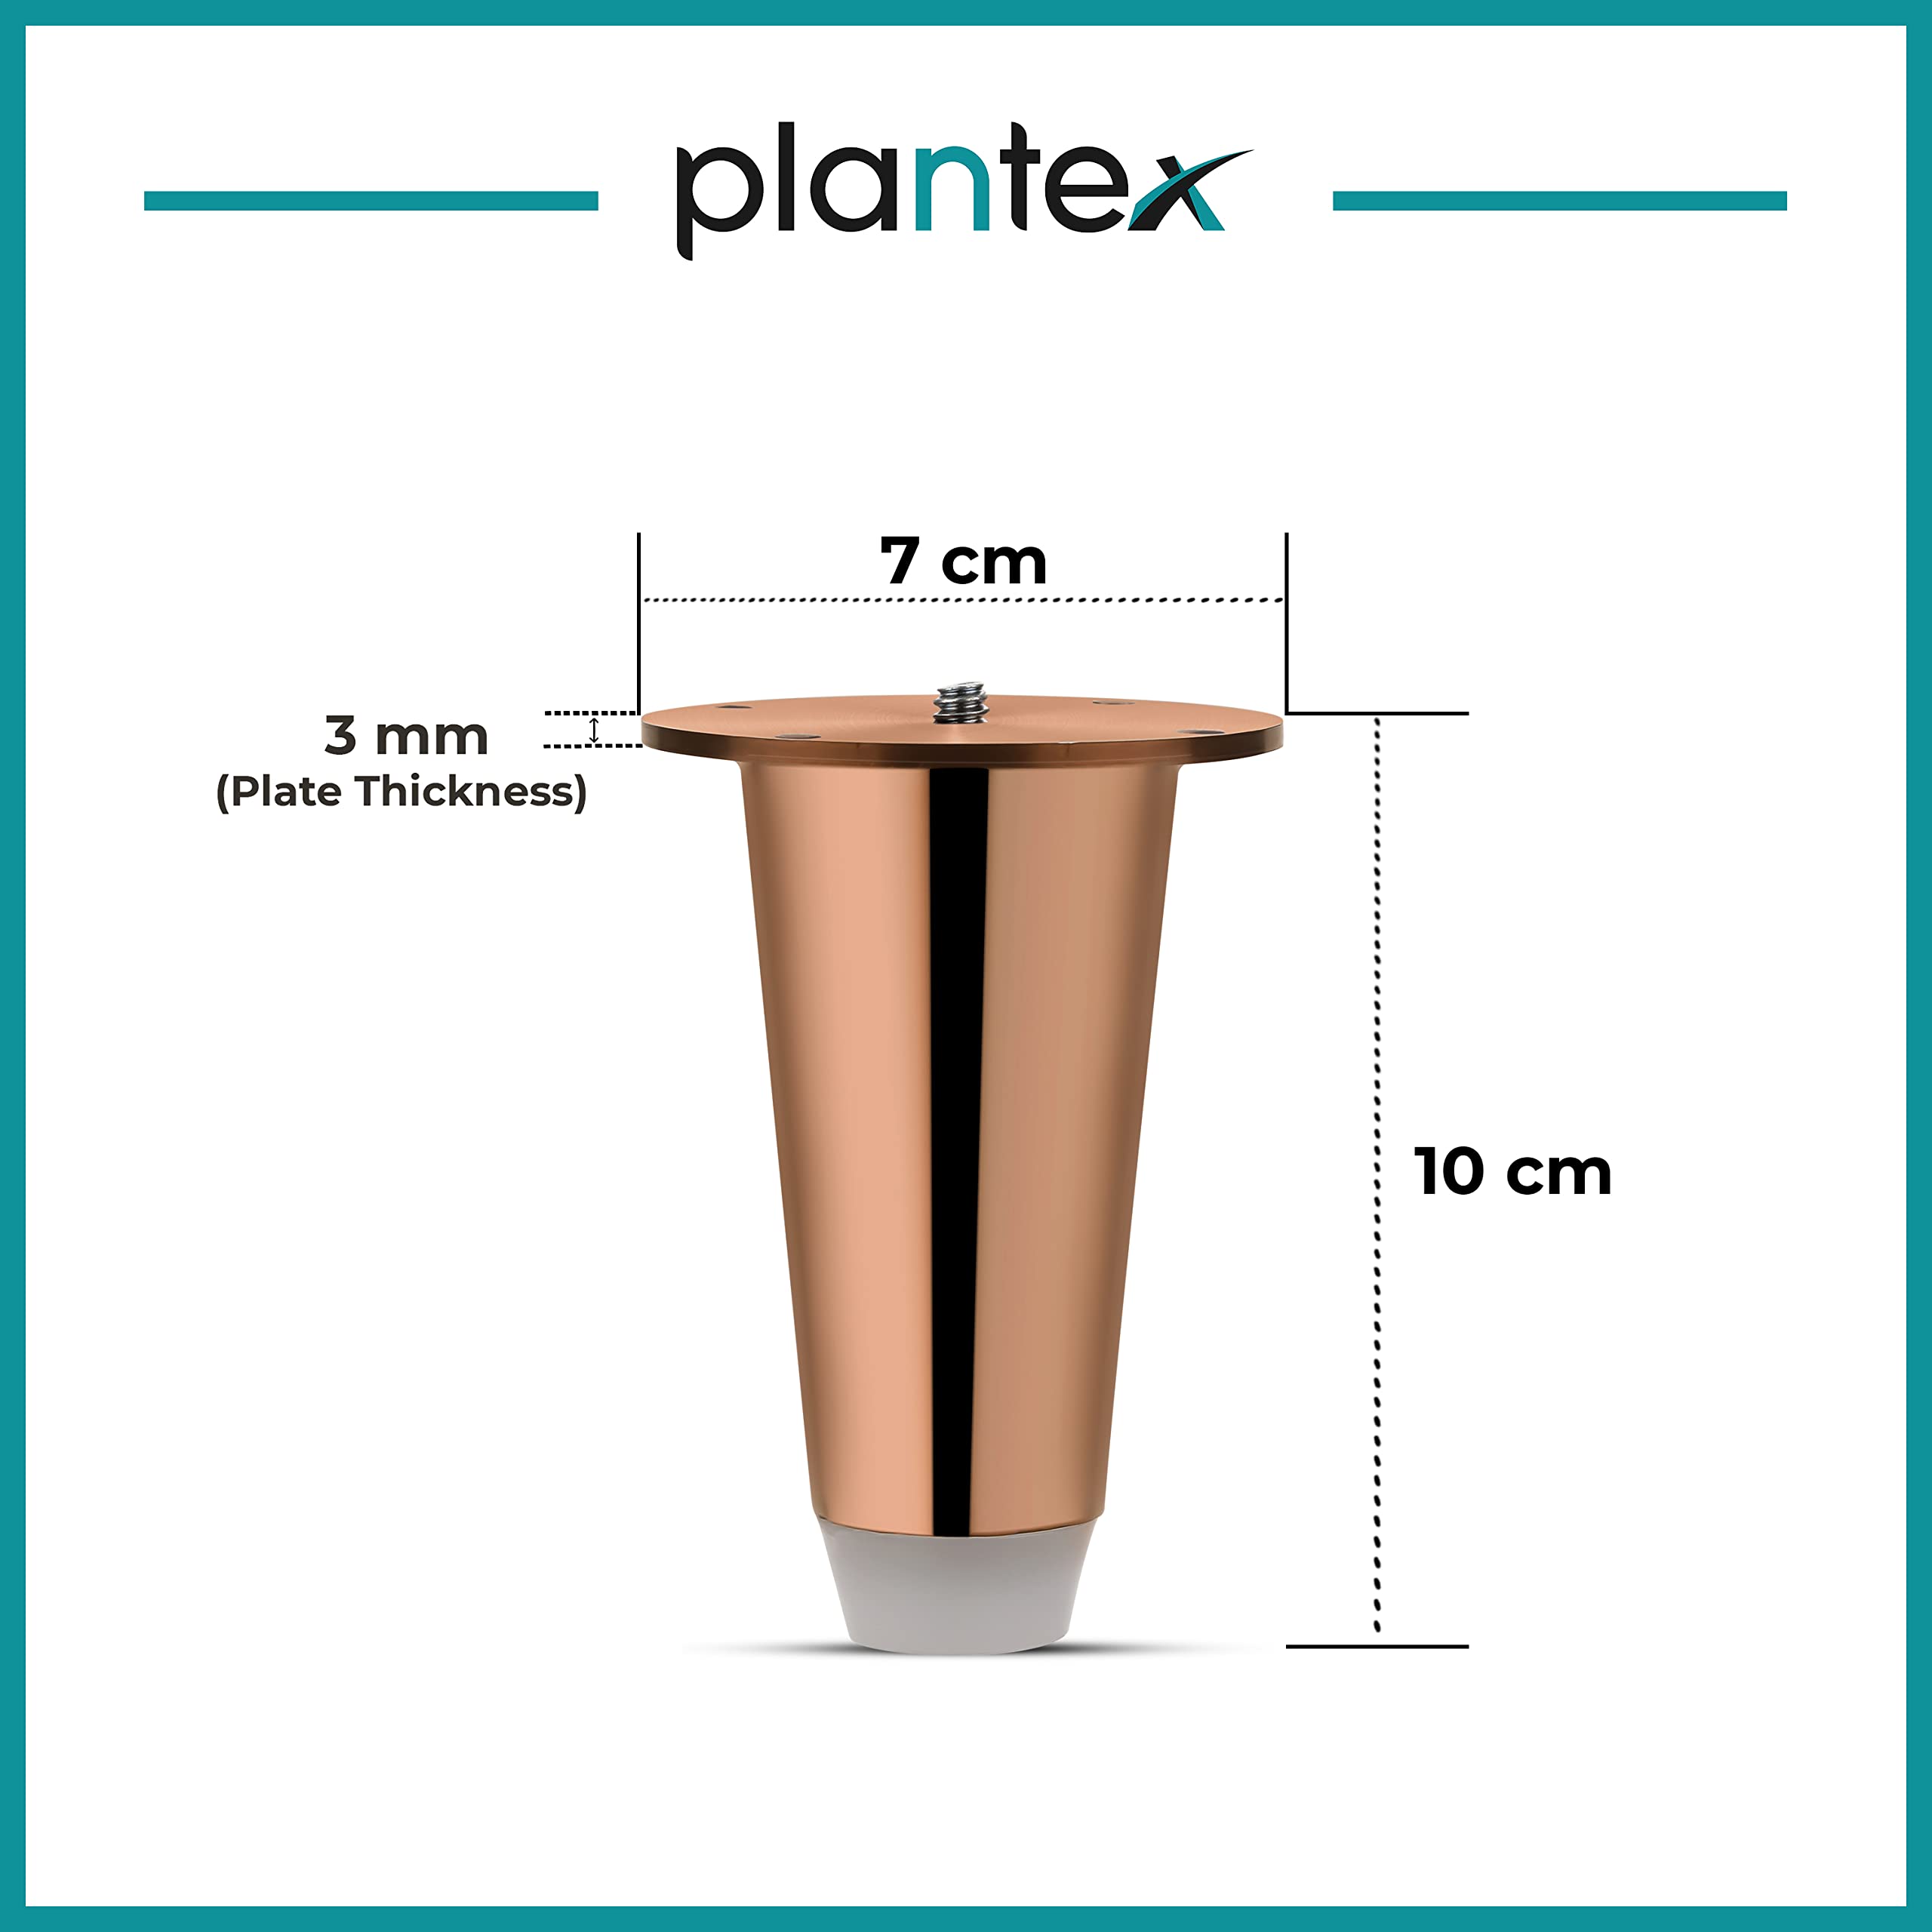 Plantex Heavy Duty Stainless Steel 4 inch Sofa Leg/Bed Furniture Leg Pair for Home Furnitures (DTS-53, Rose Gold) – 8 pcs